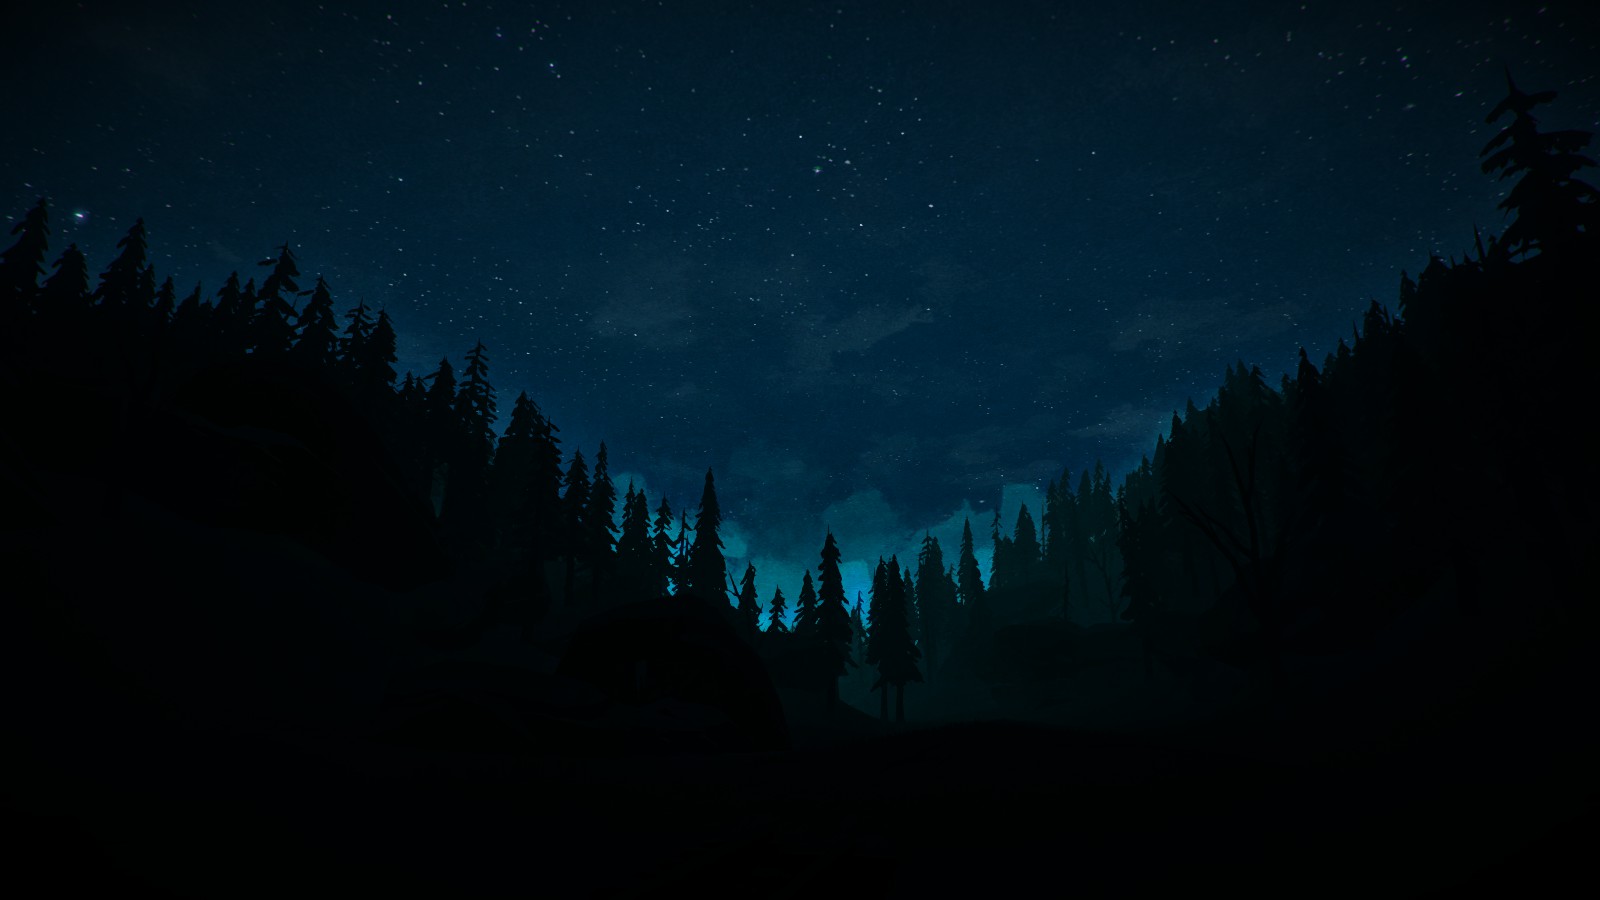 the long dark, video game, forest, night, sky, wood